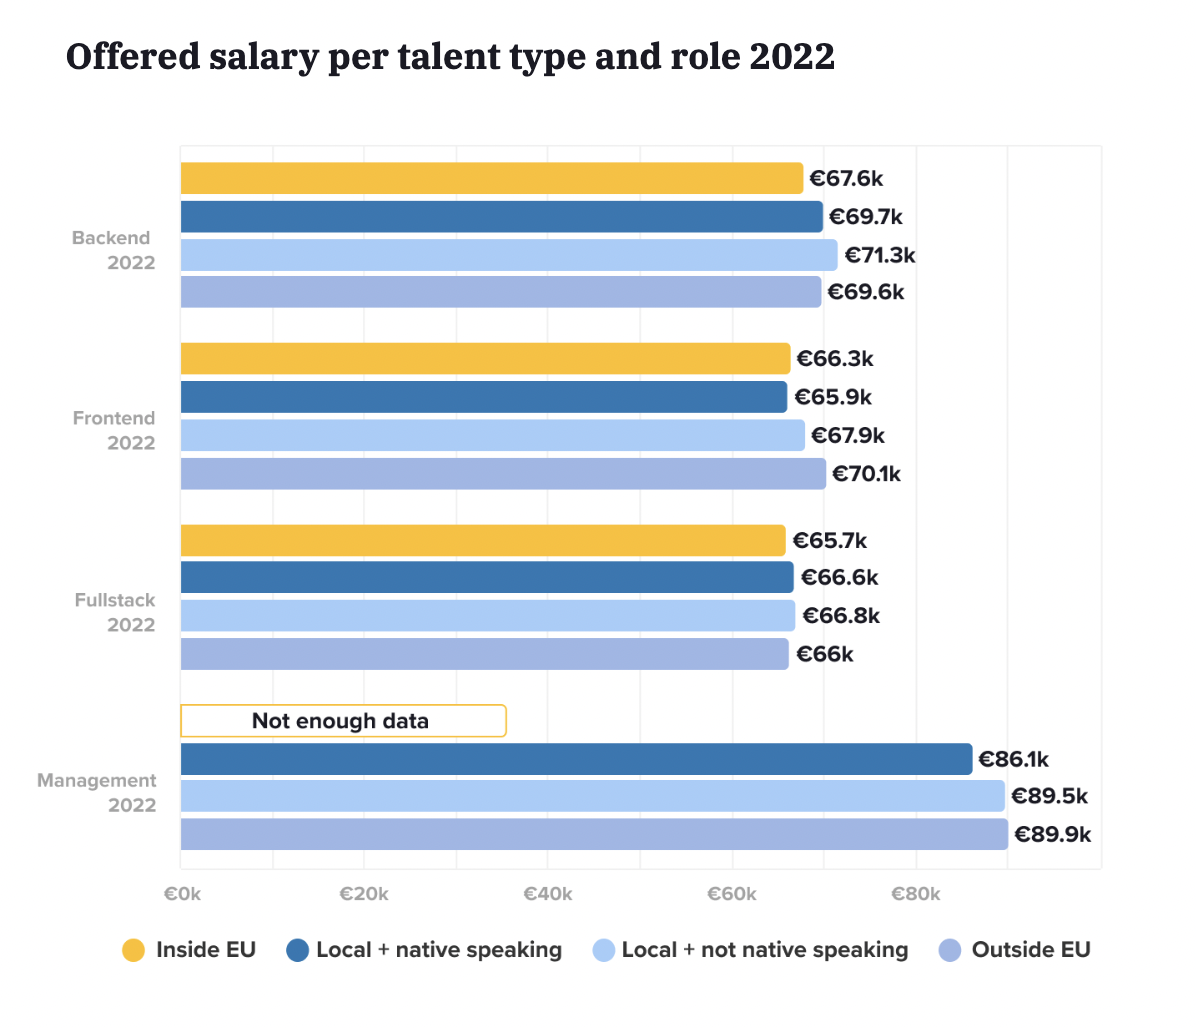 Offered salary in Germany per talent type and role 2022 